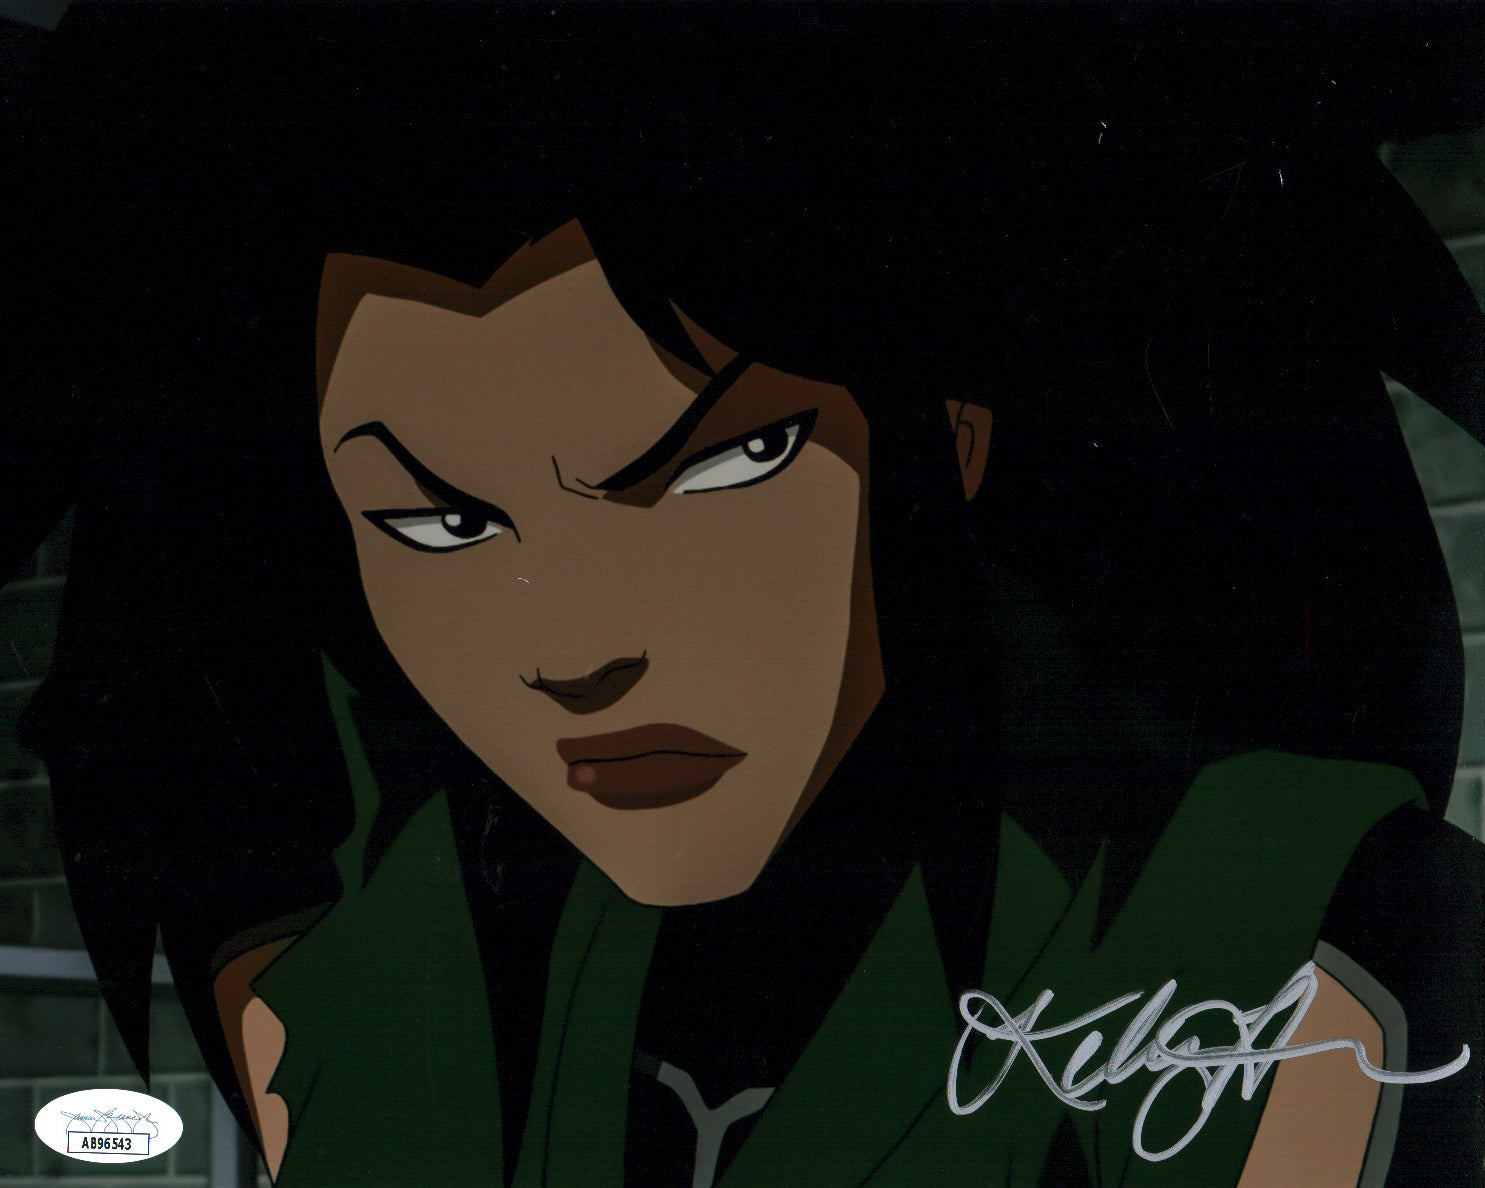 Kelly Hu Young Justice 8x10 Signed Photo JSA COA Certified Autograph